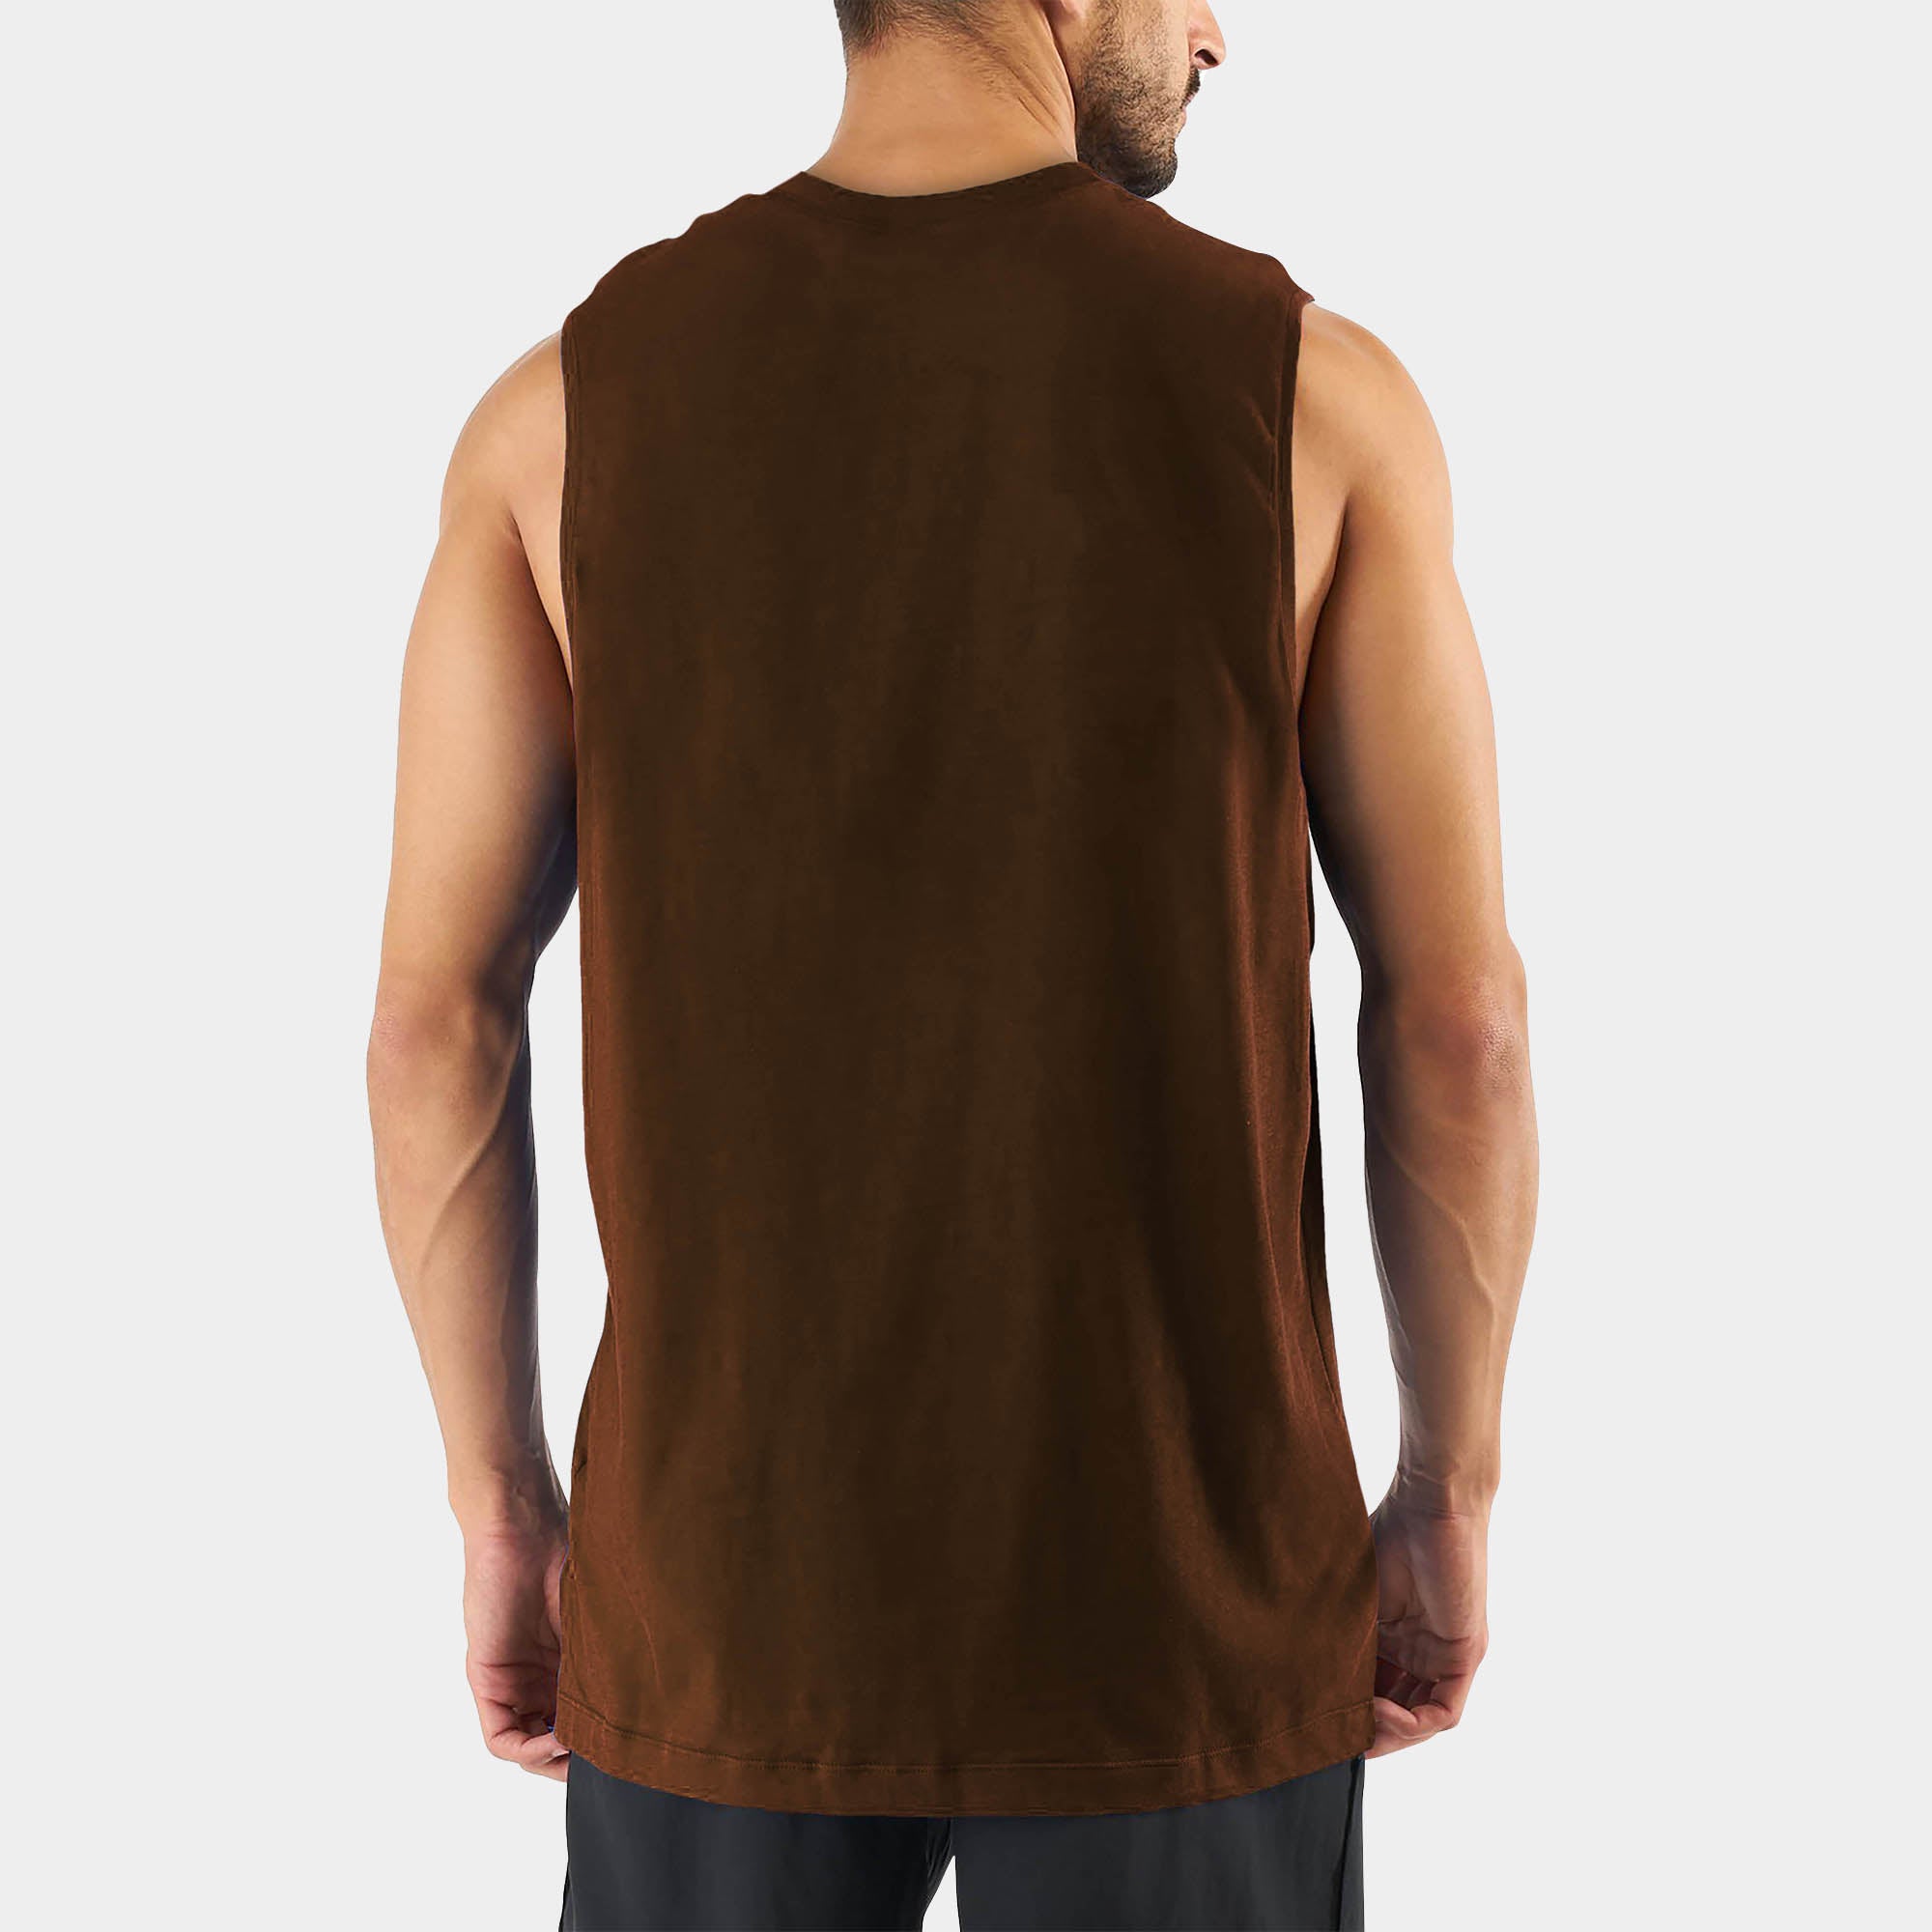 muscle tank_muscle tee_muscle tank tops_cropped muscle tank_under armour muscle shirt_insta slim tank_men muscle shirt_tank top_Brown